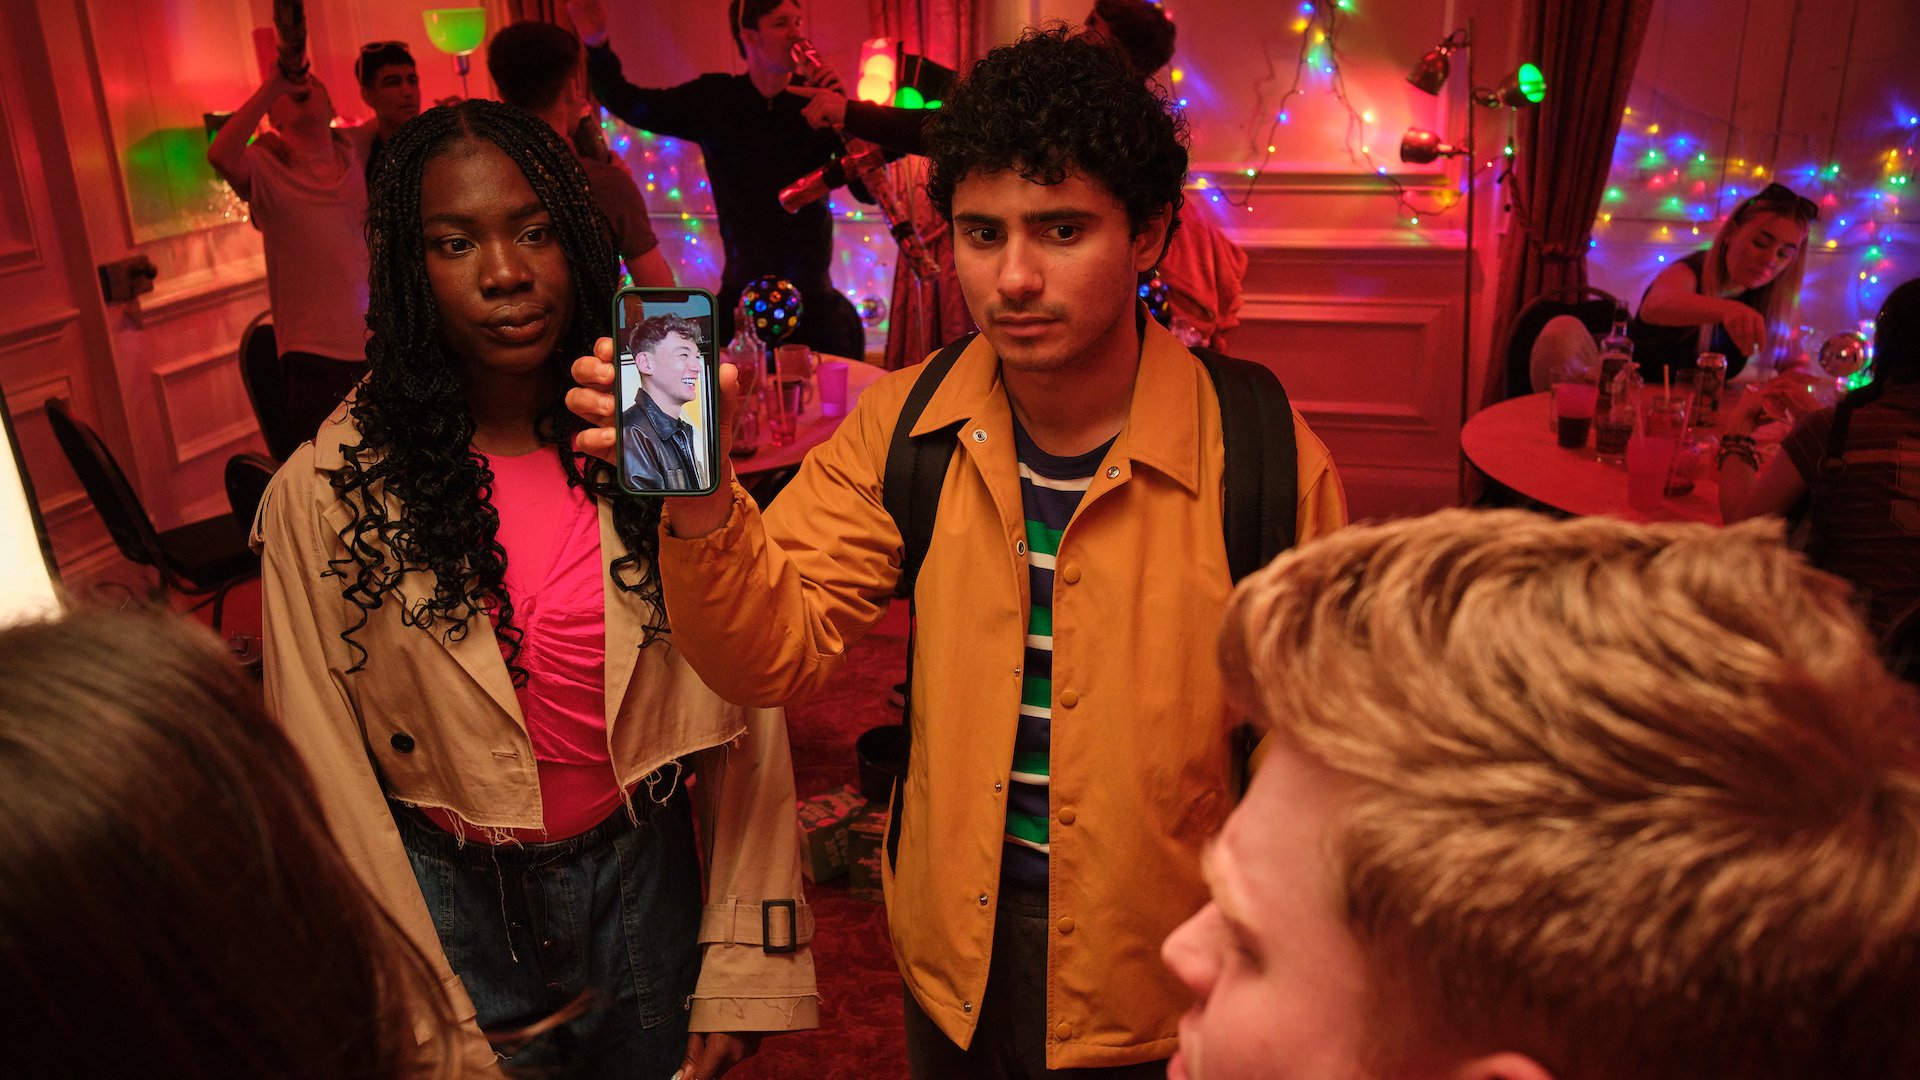 A young woman and a young man hold up a phone solemly at a party.